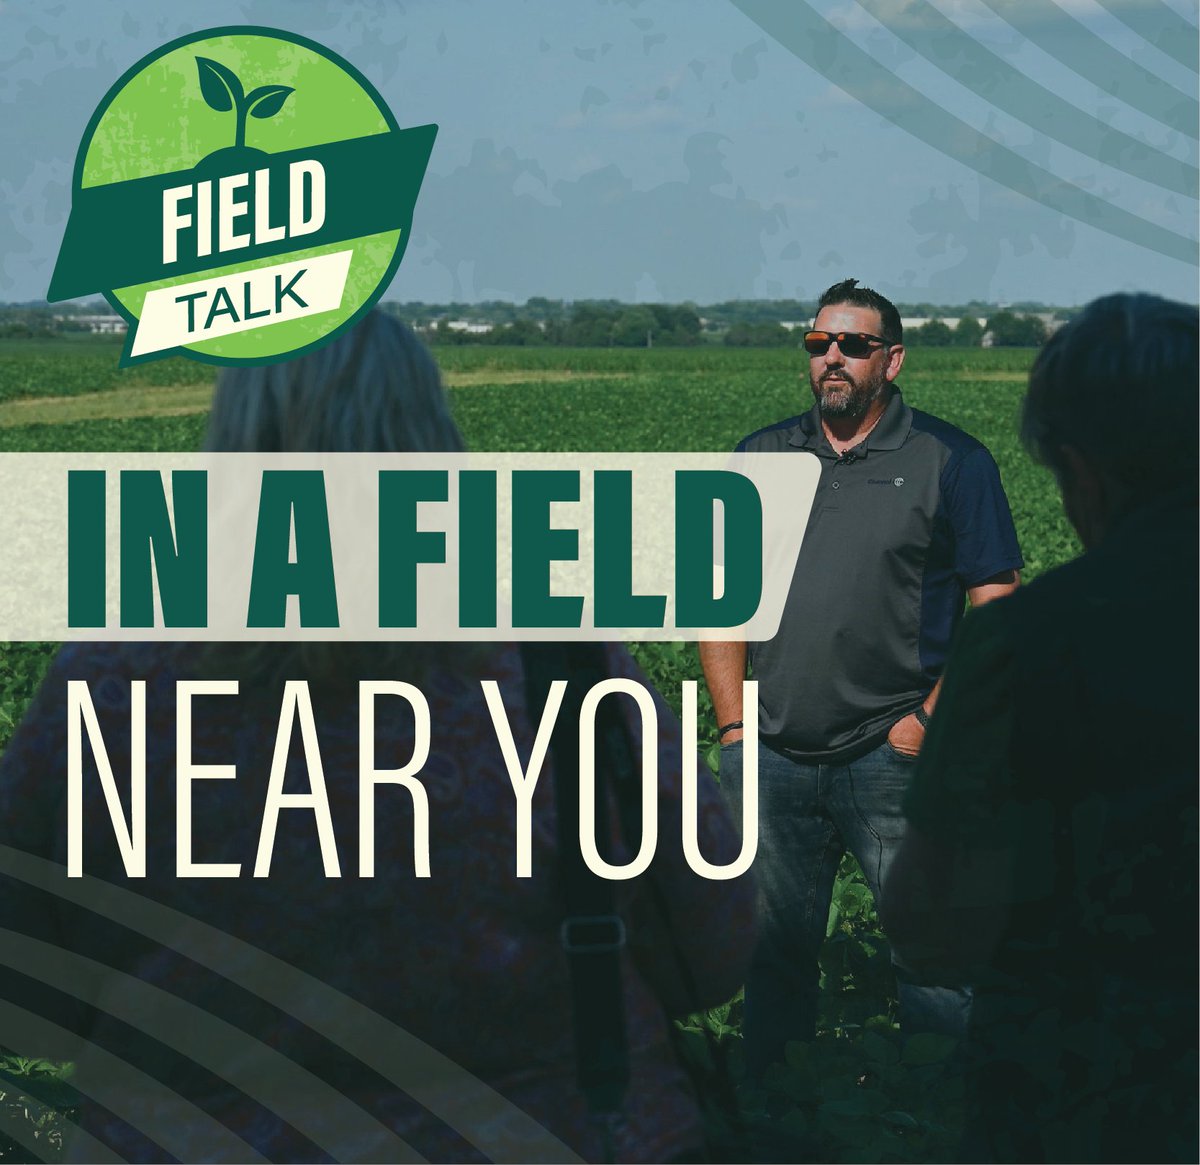 IN TWO WEEKS: @ILSoybean, Vermilion County SWCD, @Farmland, and @ProHarvestSeeds come together in Hoopeston to talk about an on-farm research plot exploring cover crops & nitrogen management. Register now: bit.ly/3s72d3g